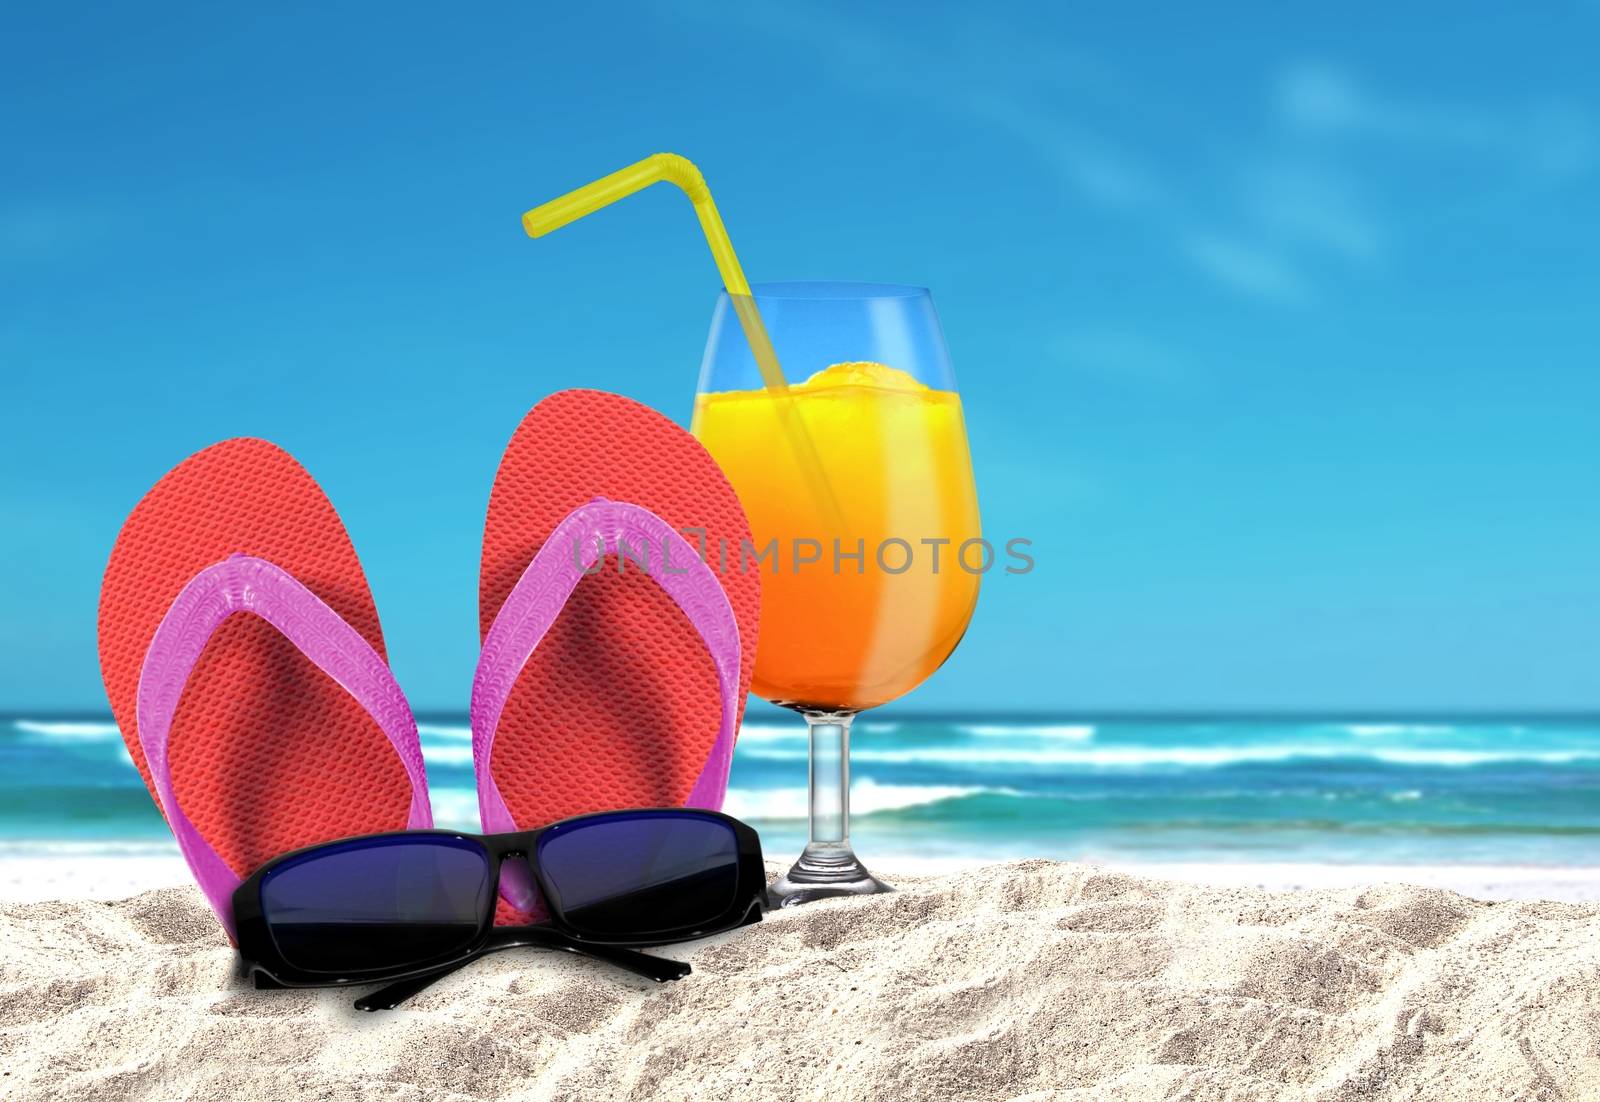 Slipper with sungalsses and orange drinks on a beach